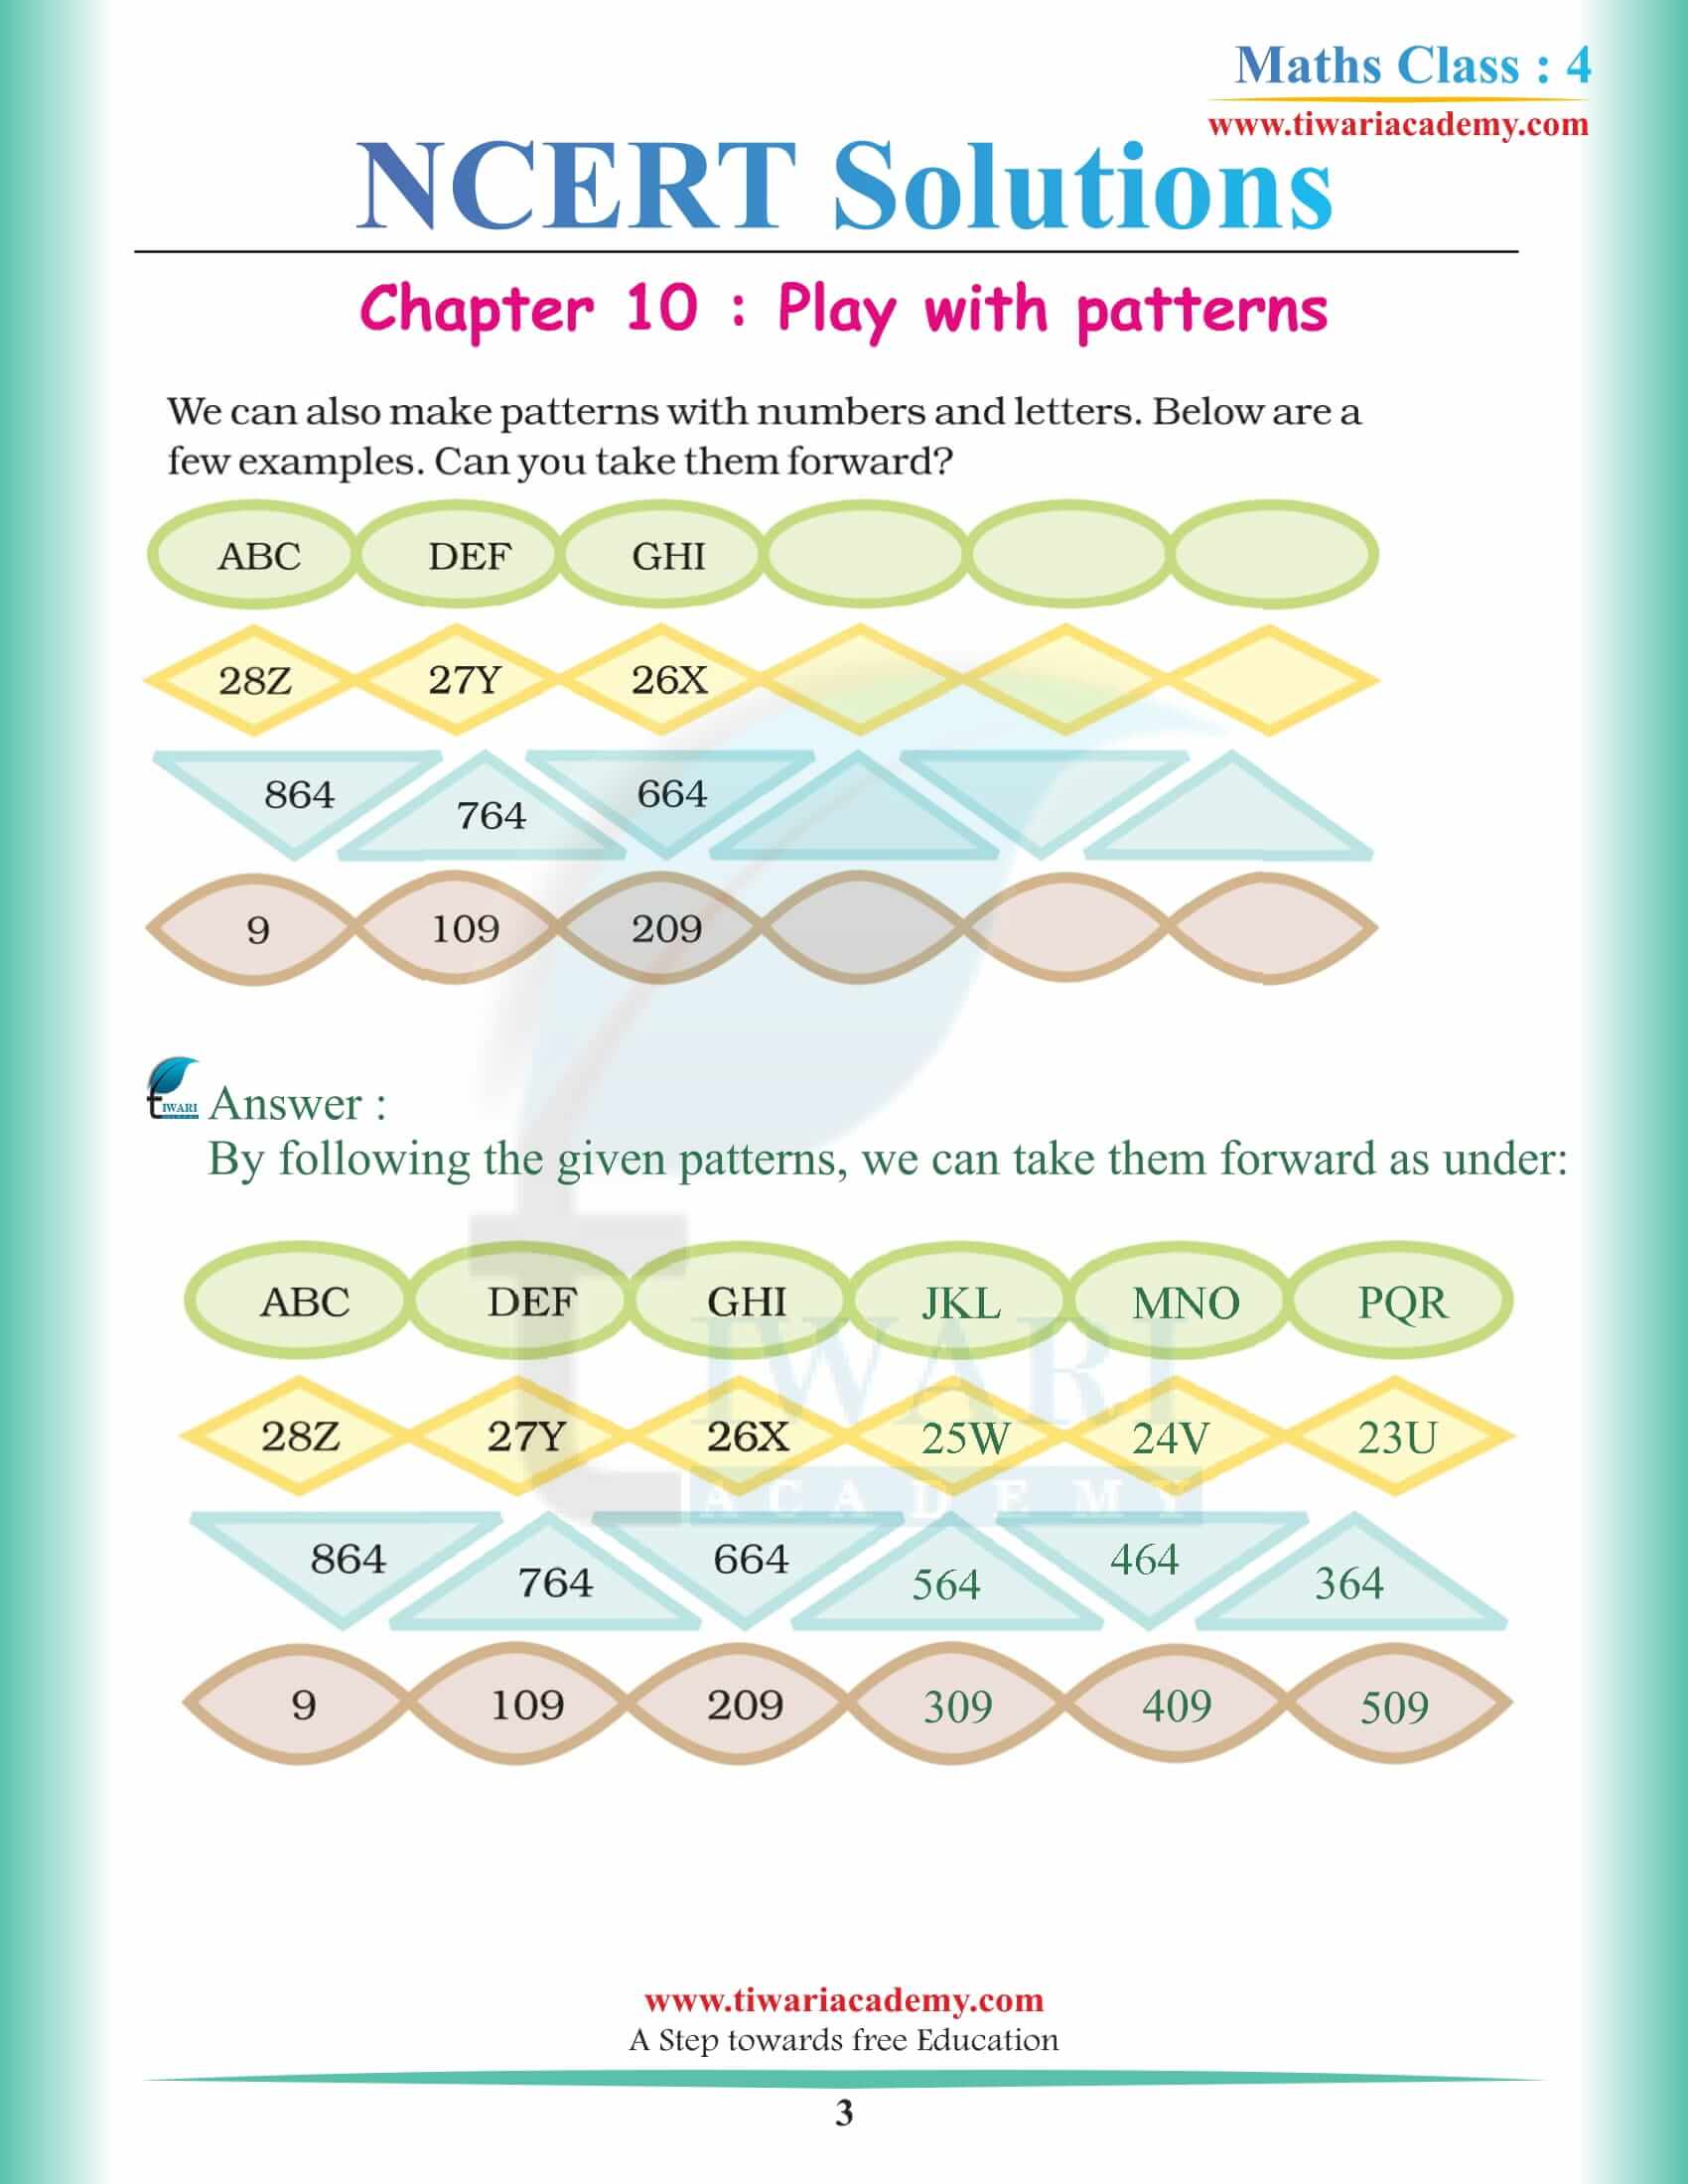 NCERT Solutions for Class 4 Maths Chapter 10 in English Medium